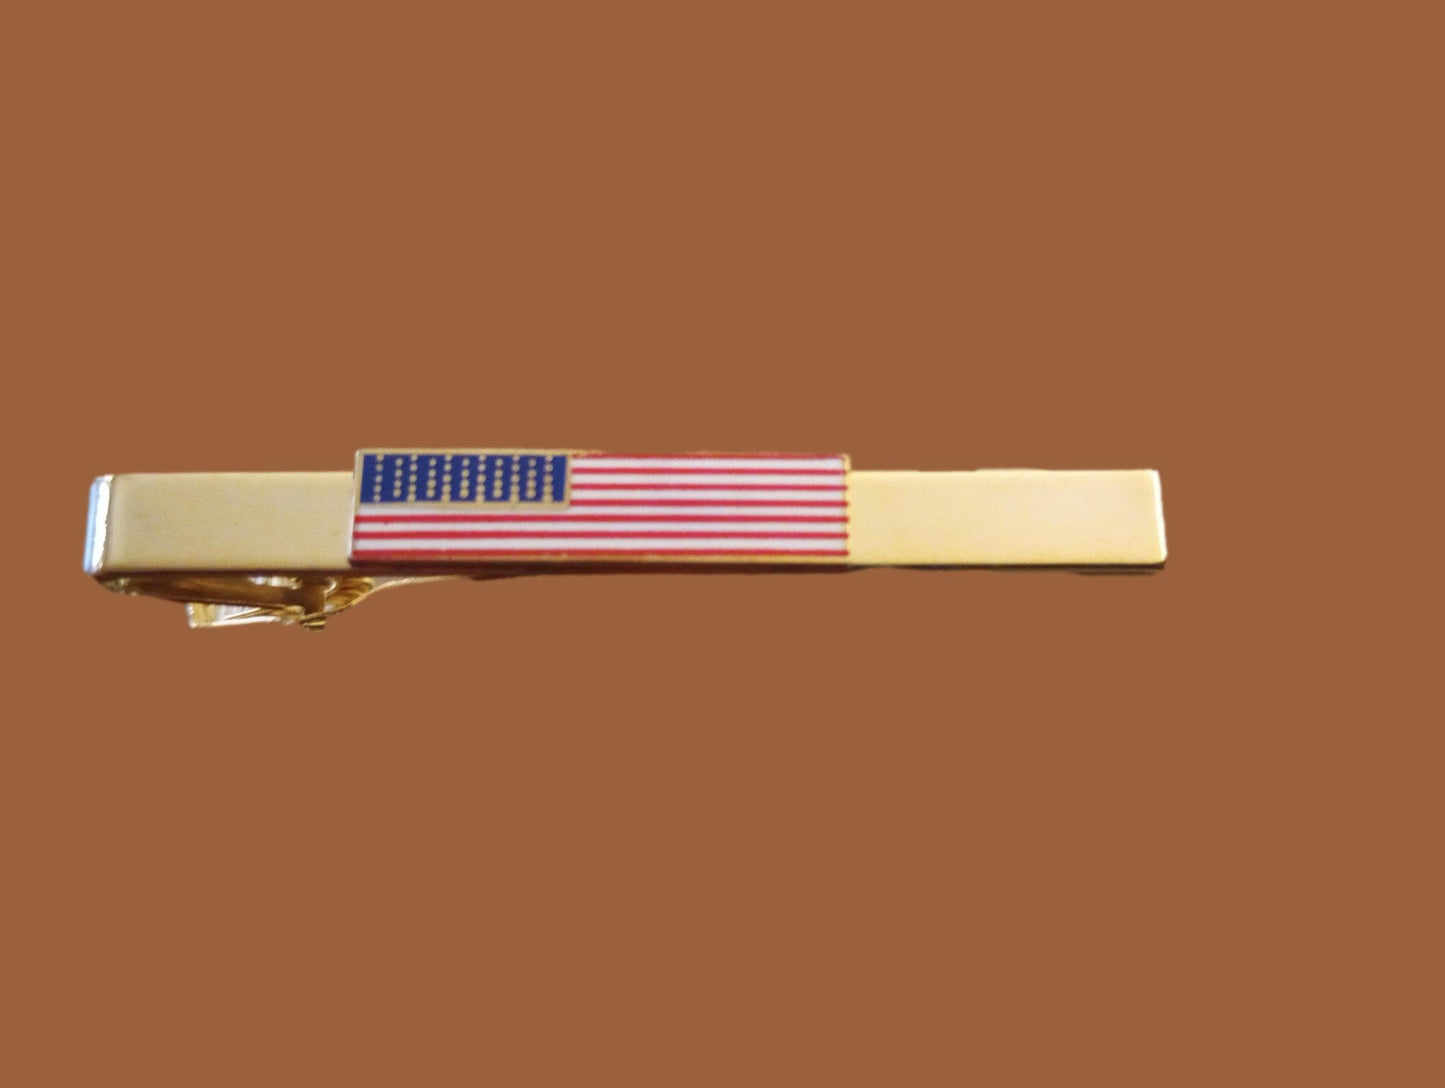 U.S FLAG U.S.A FLAG TIE BAR TIE TAC GOLD COLOR BAR MADE IN THE U.S.A NEW IN BAGS